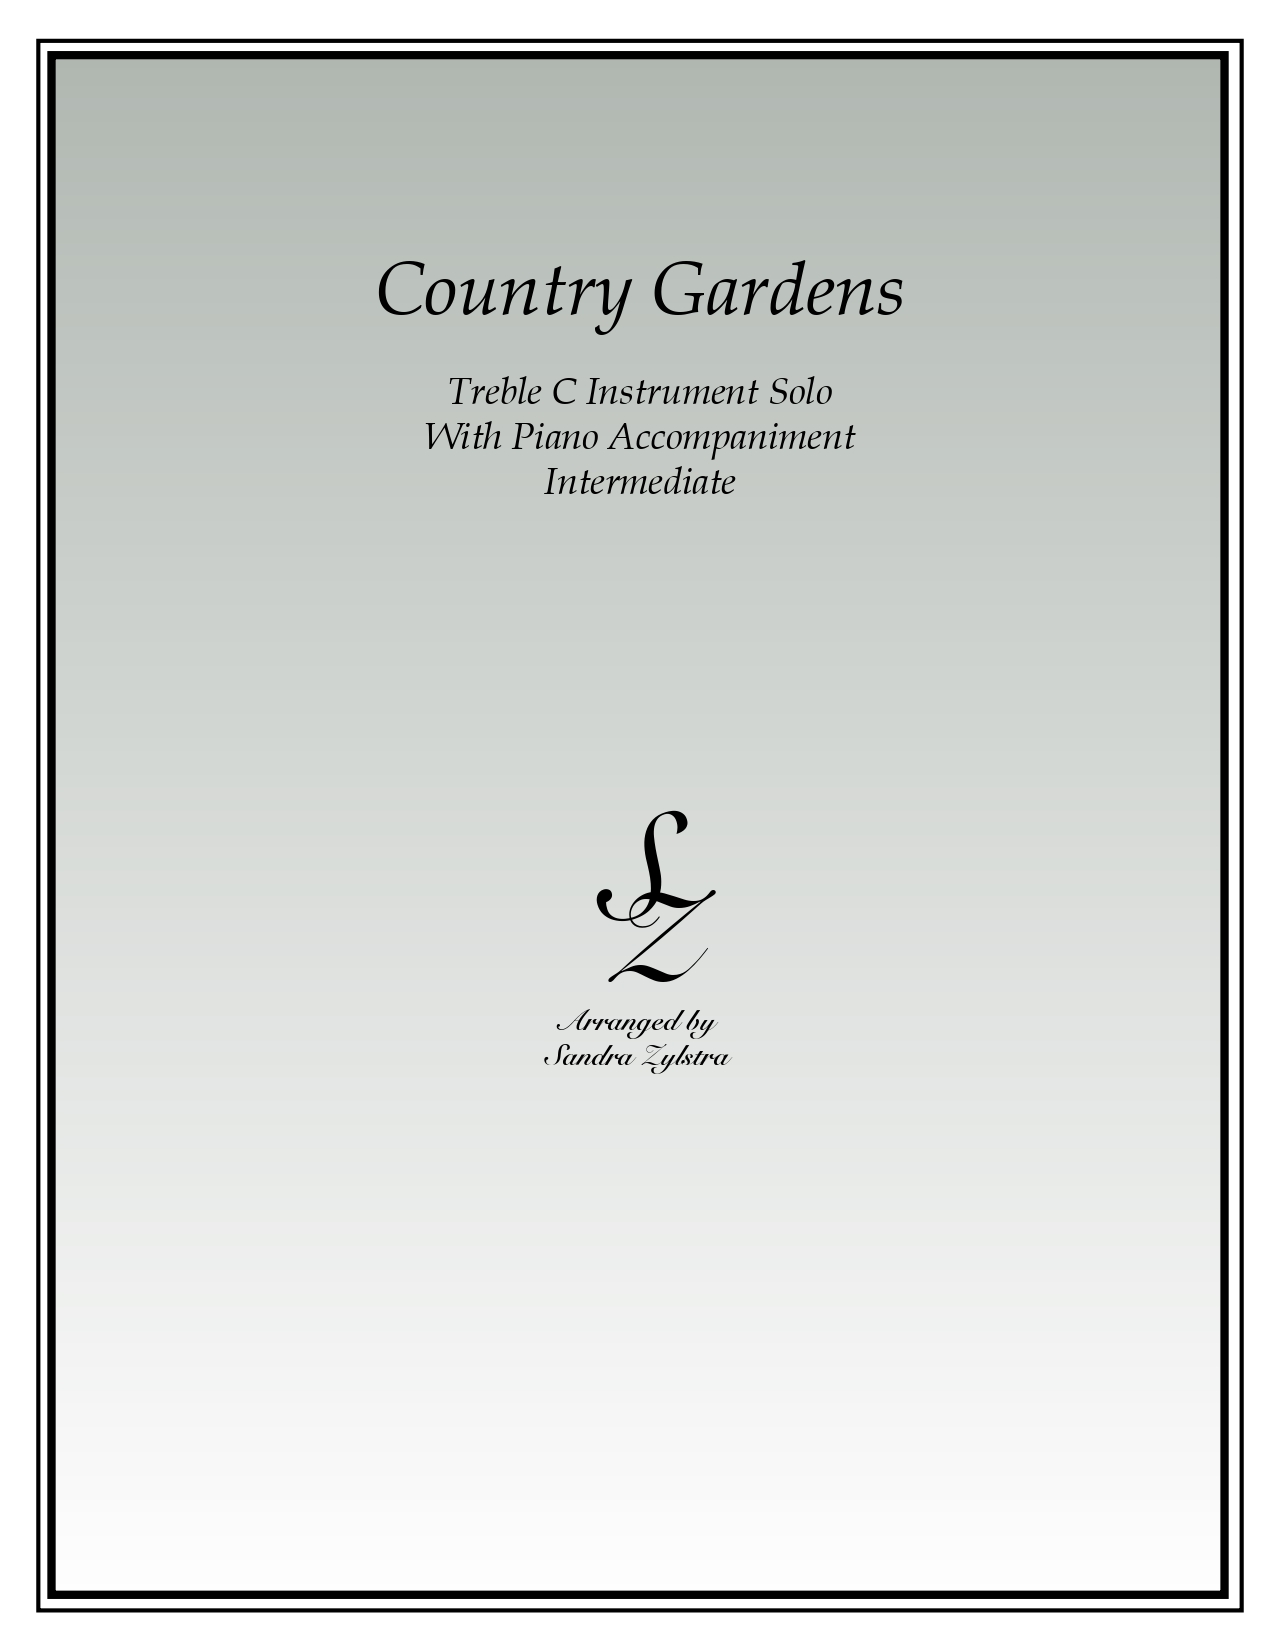 Country Gardens treble C instrument solo part cover page 00011